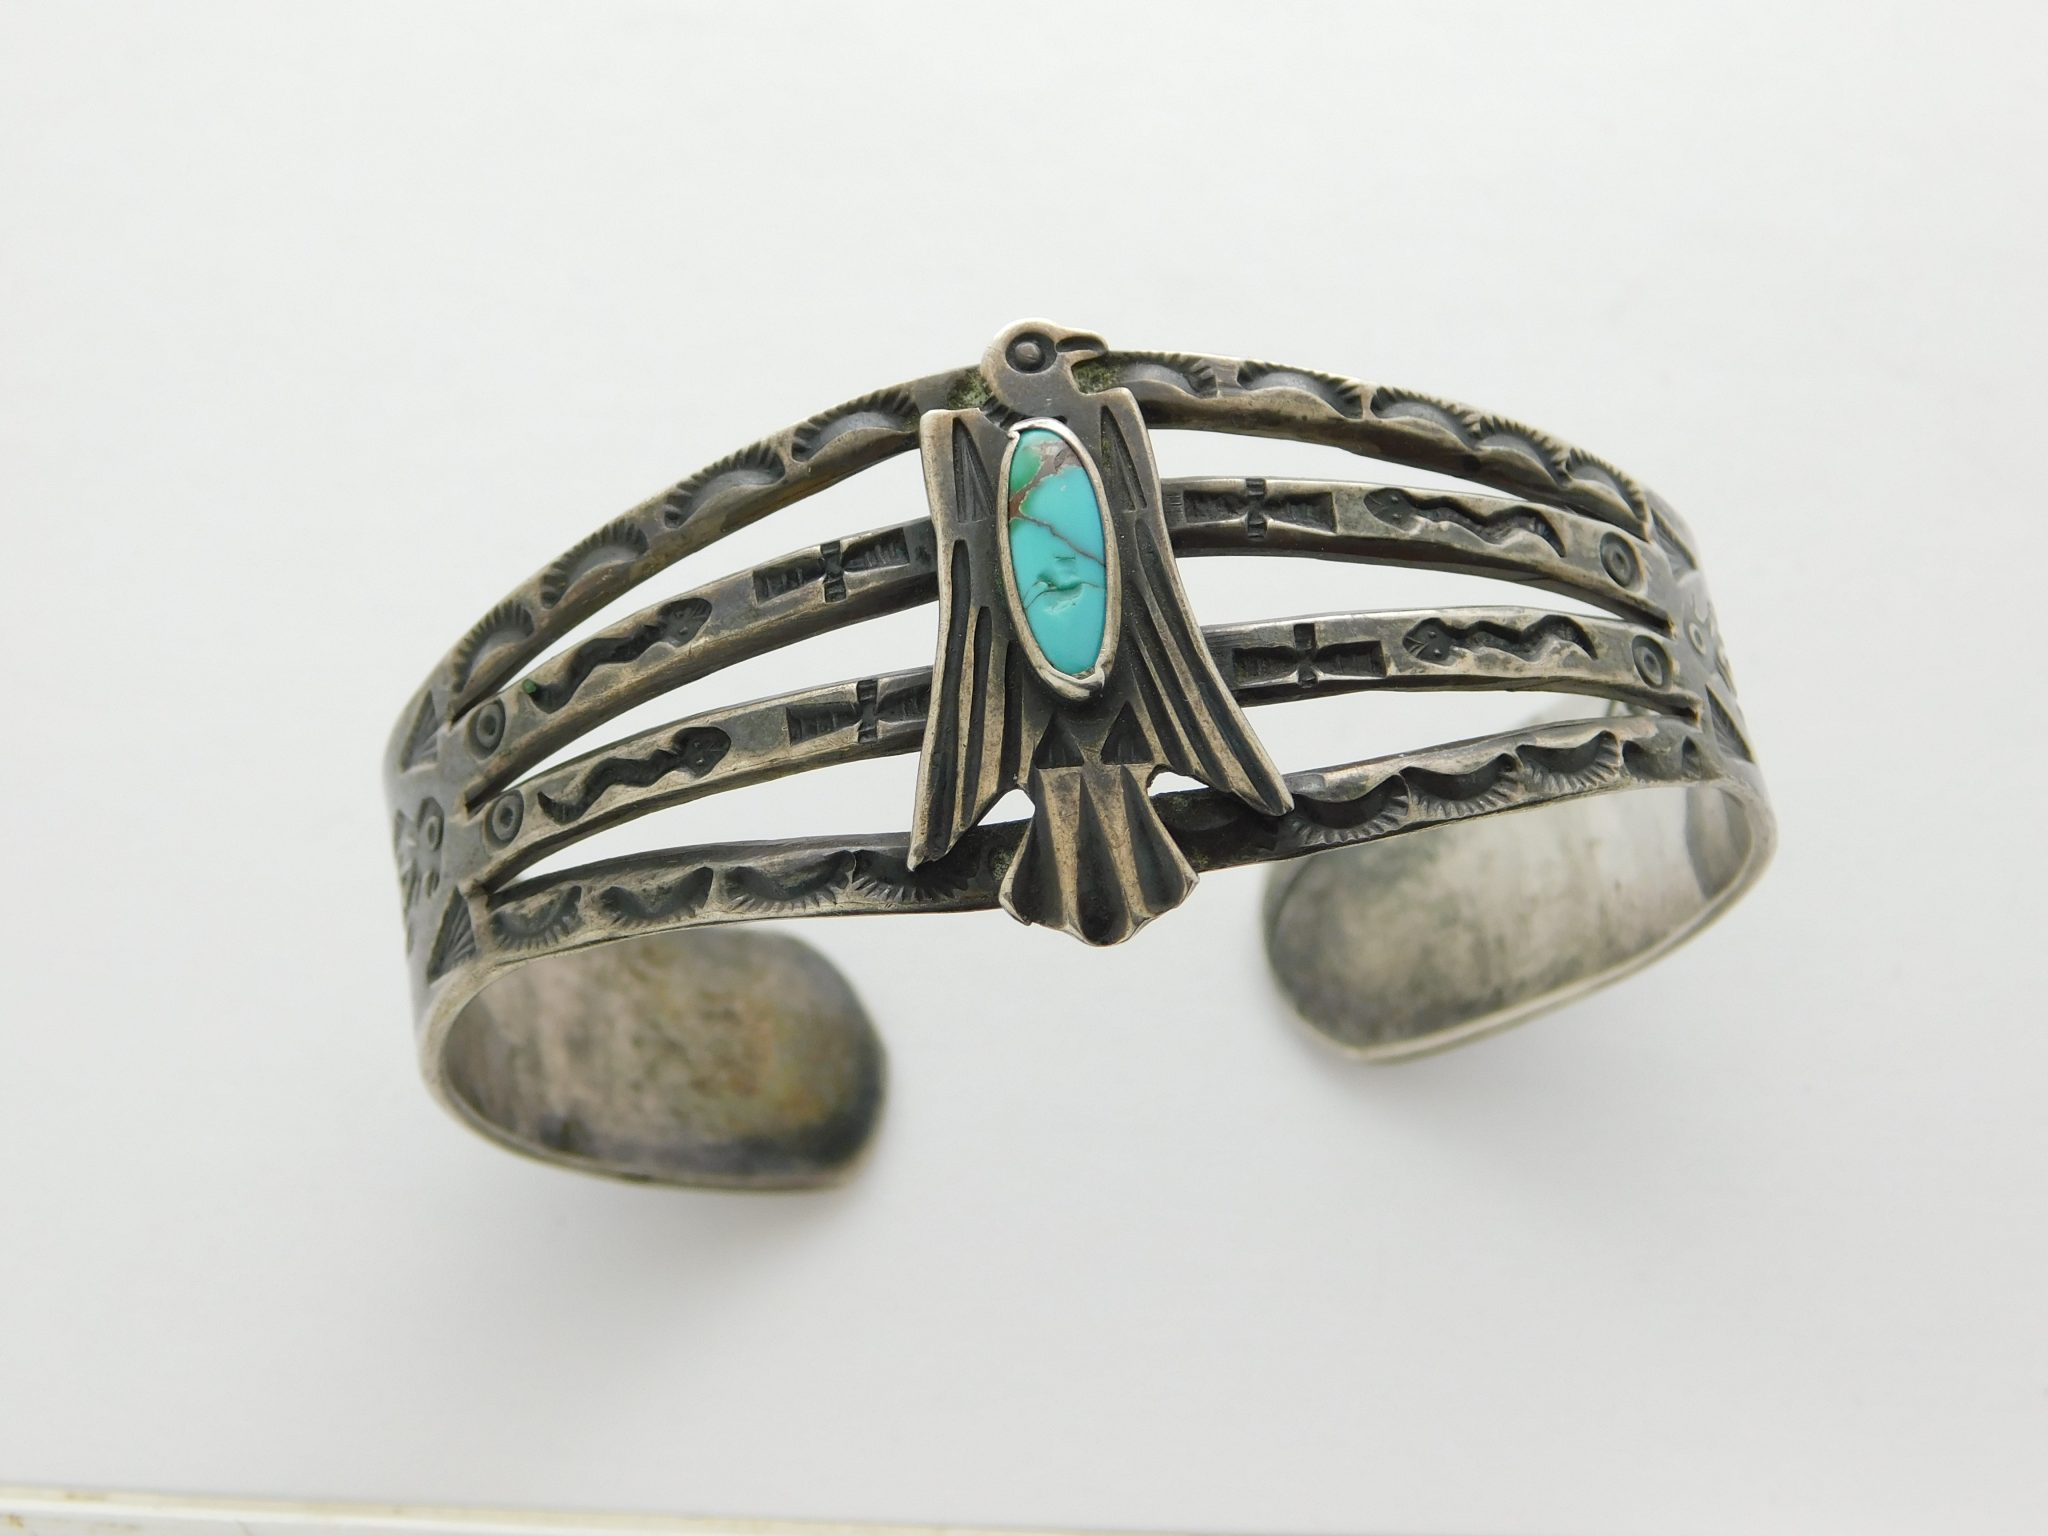 Vintage Old Pawn Silver Bracelet with Turquoise Stones South Western - Ruby  Lane